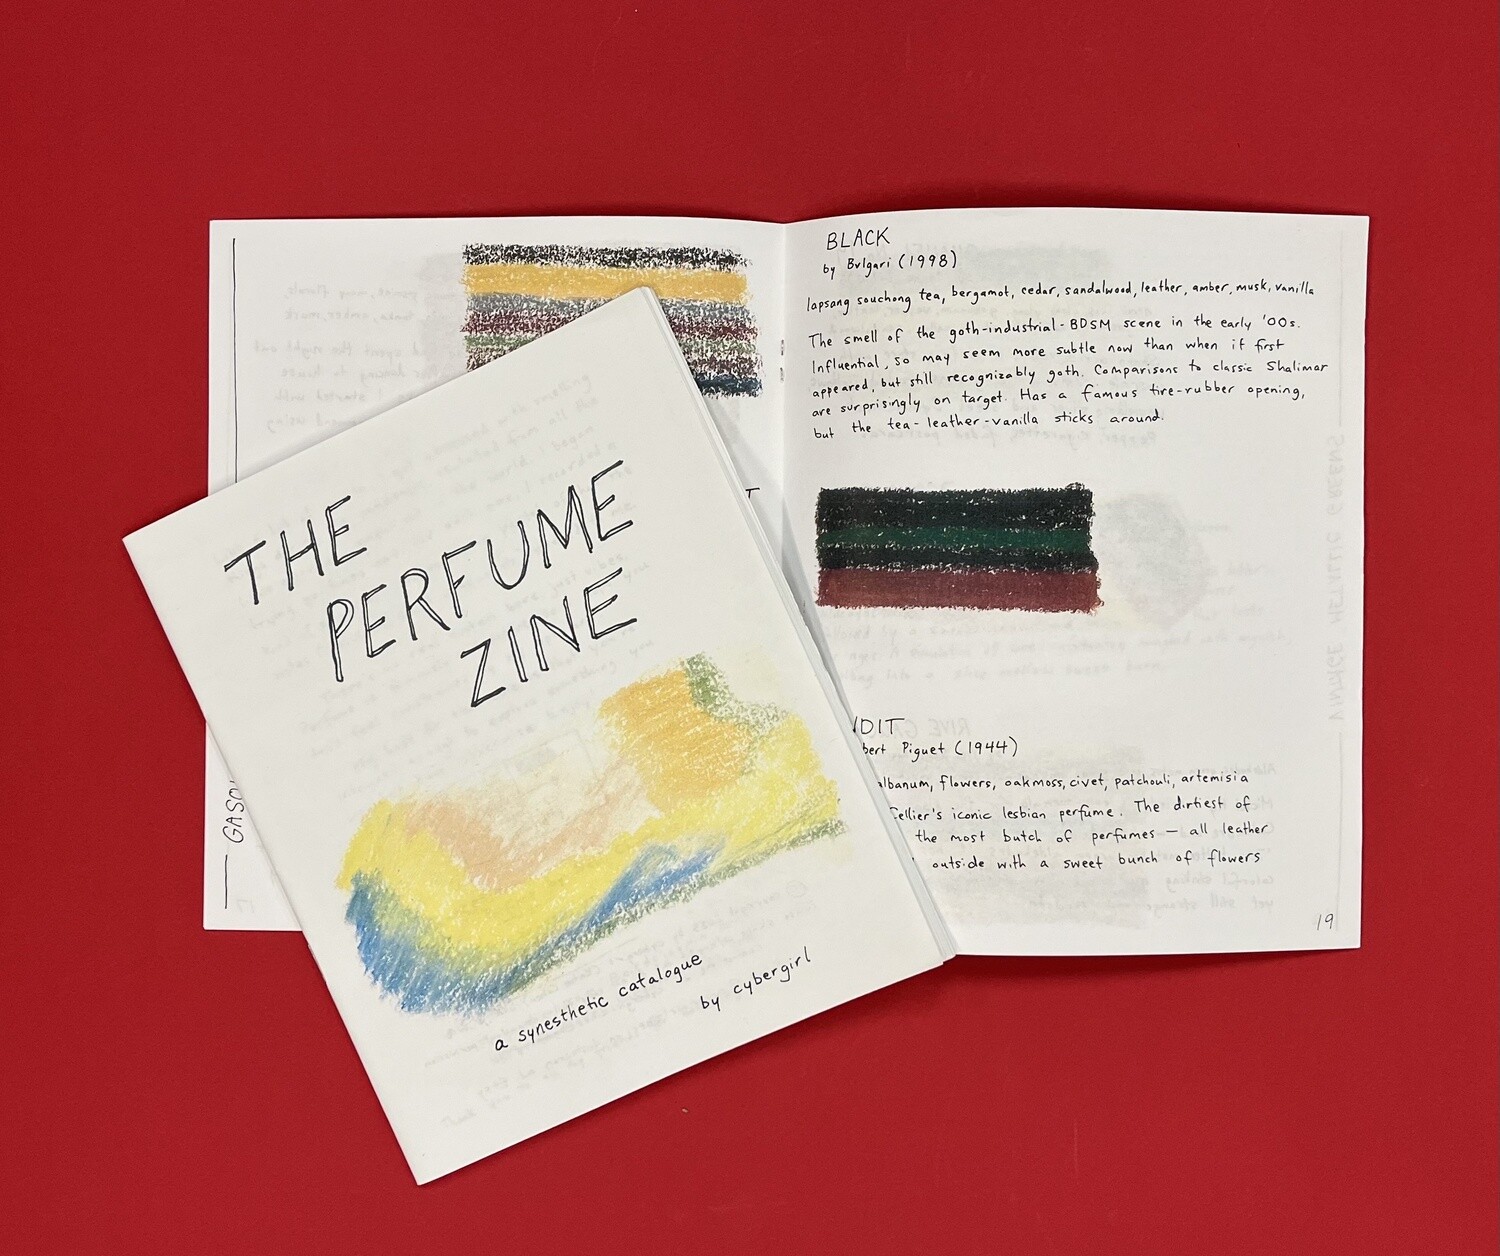 The Perfume Zine: A Synesthetic Catalogue, zine by Cybergirl